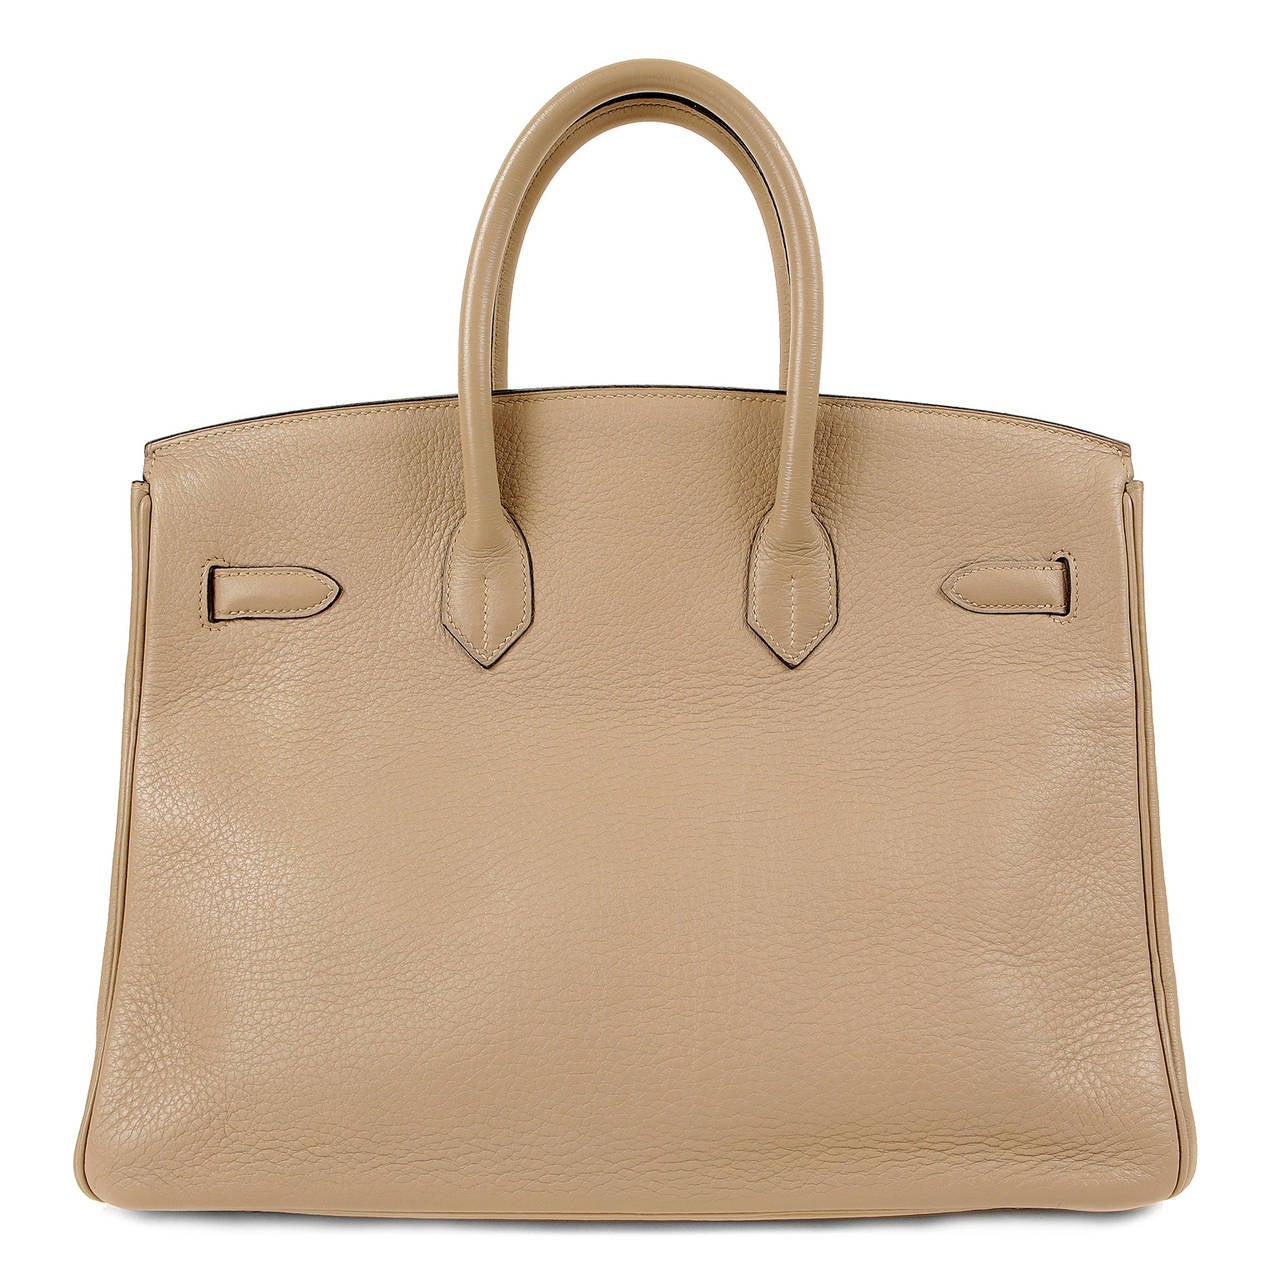 Hermès Etoupe Clemence 35 cm Birkin is in better than excellent condition.  Hermès bags are considered the ultimate luxury item the world over.  Hand stitched by skilled craftsmen, wait lists of a year or more are commonplace.  This particular